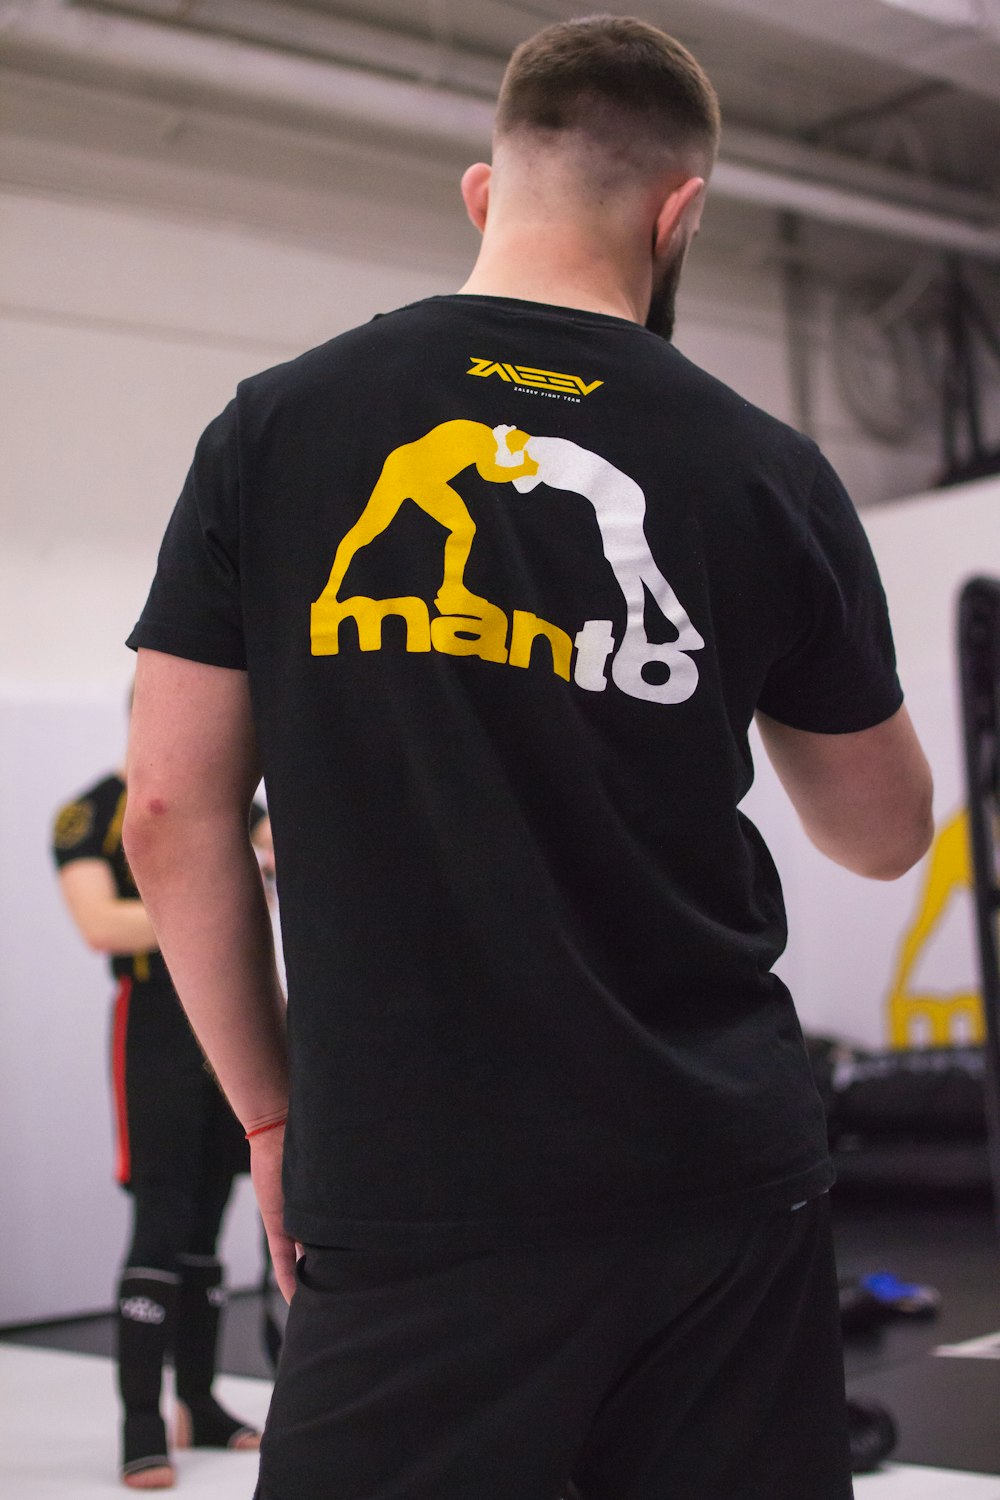 man in black and yellow crew neck t-shirt